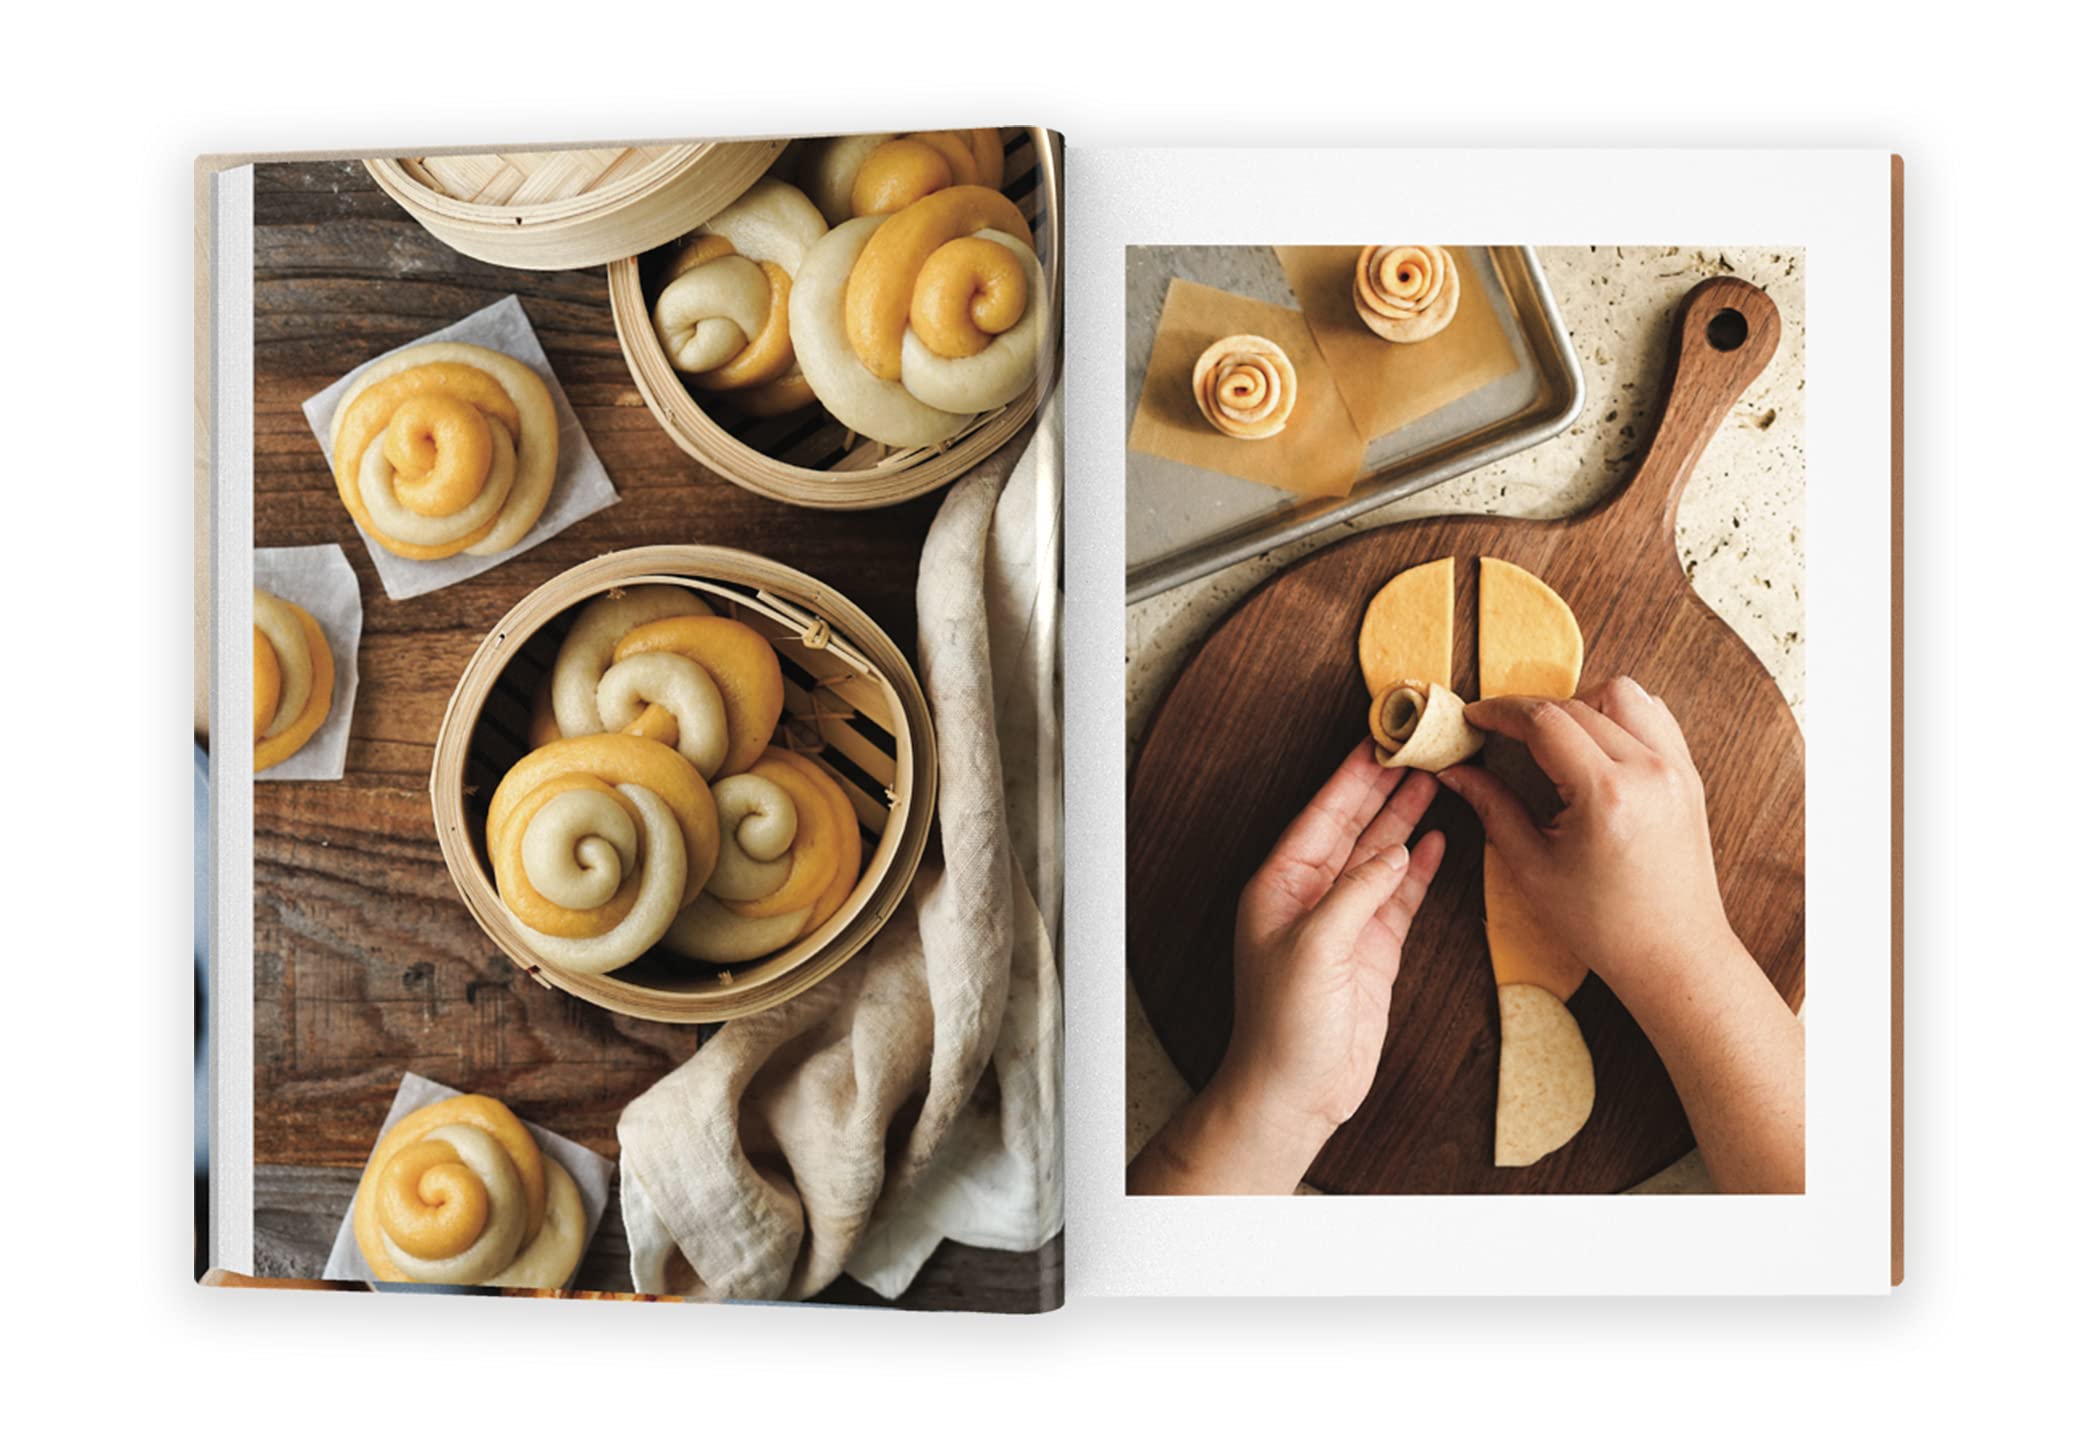 Mooncakes and Milk Bread: Sweet and Savory Recipes Inspired by Chinese Bakeries (Kristina Cho) *Signed*